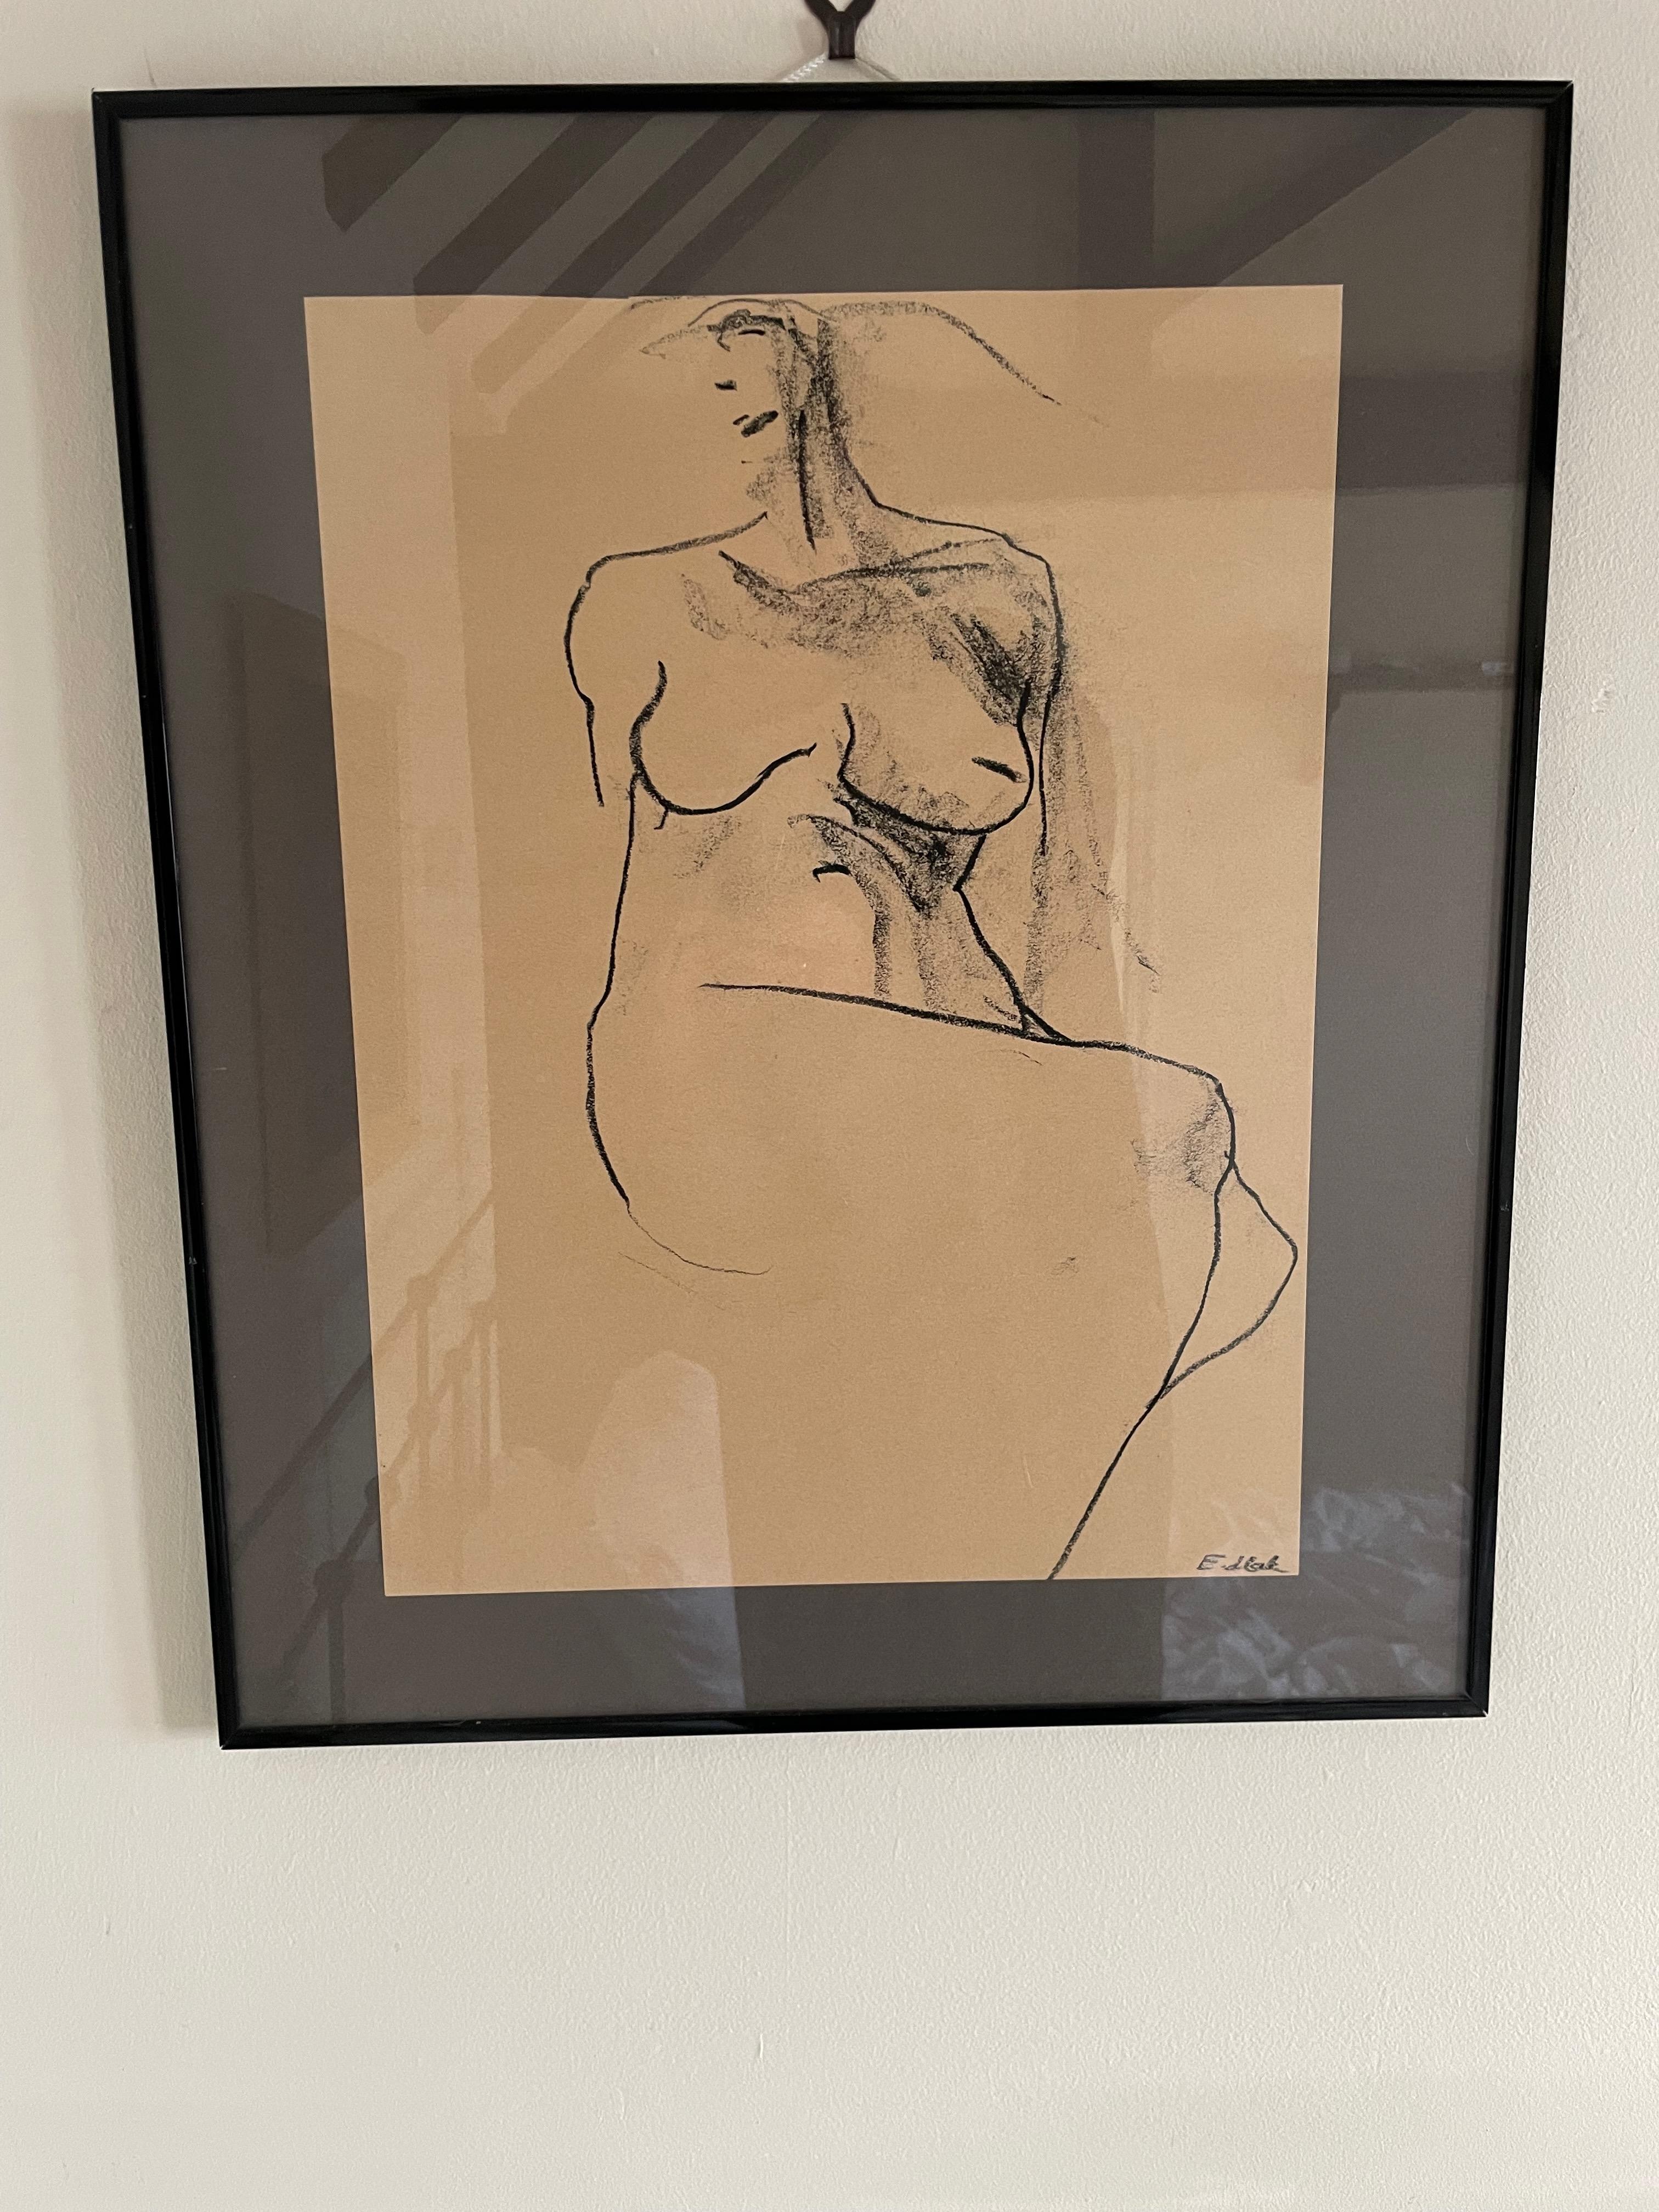 Rare and unique charcoal drawing. The Artist is currently unknown. It formed part of the collection of the late Francois Catroux and his wife Betty Catroux.